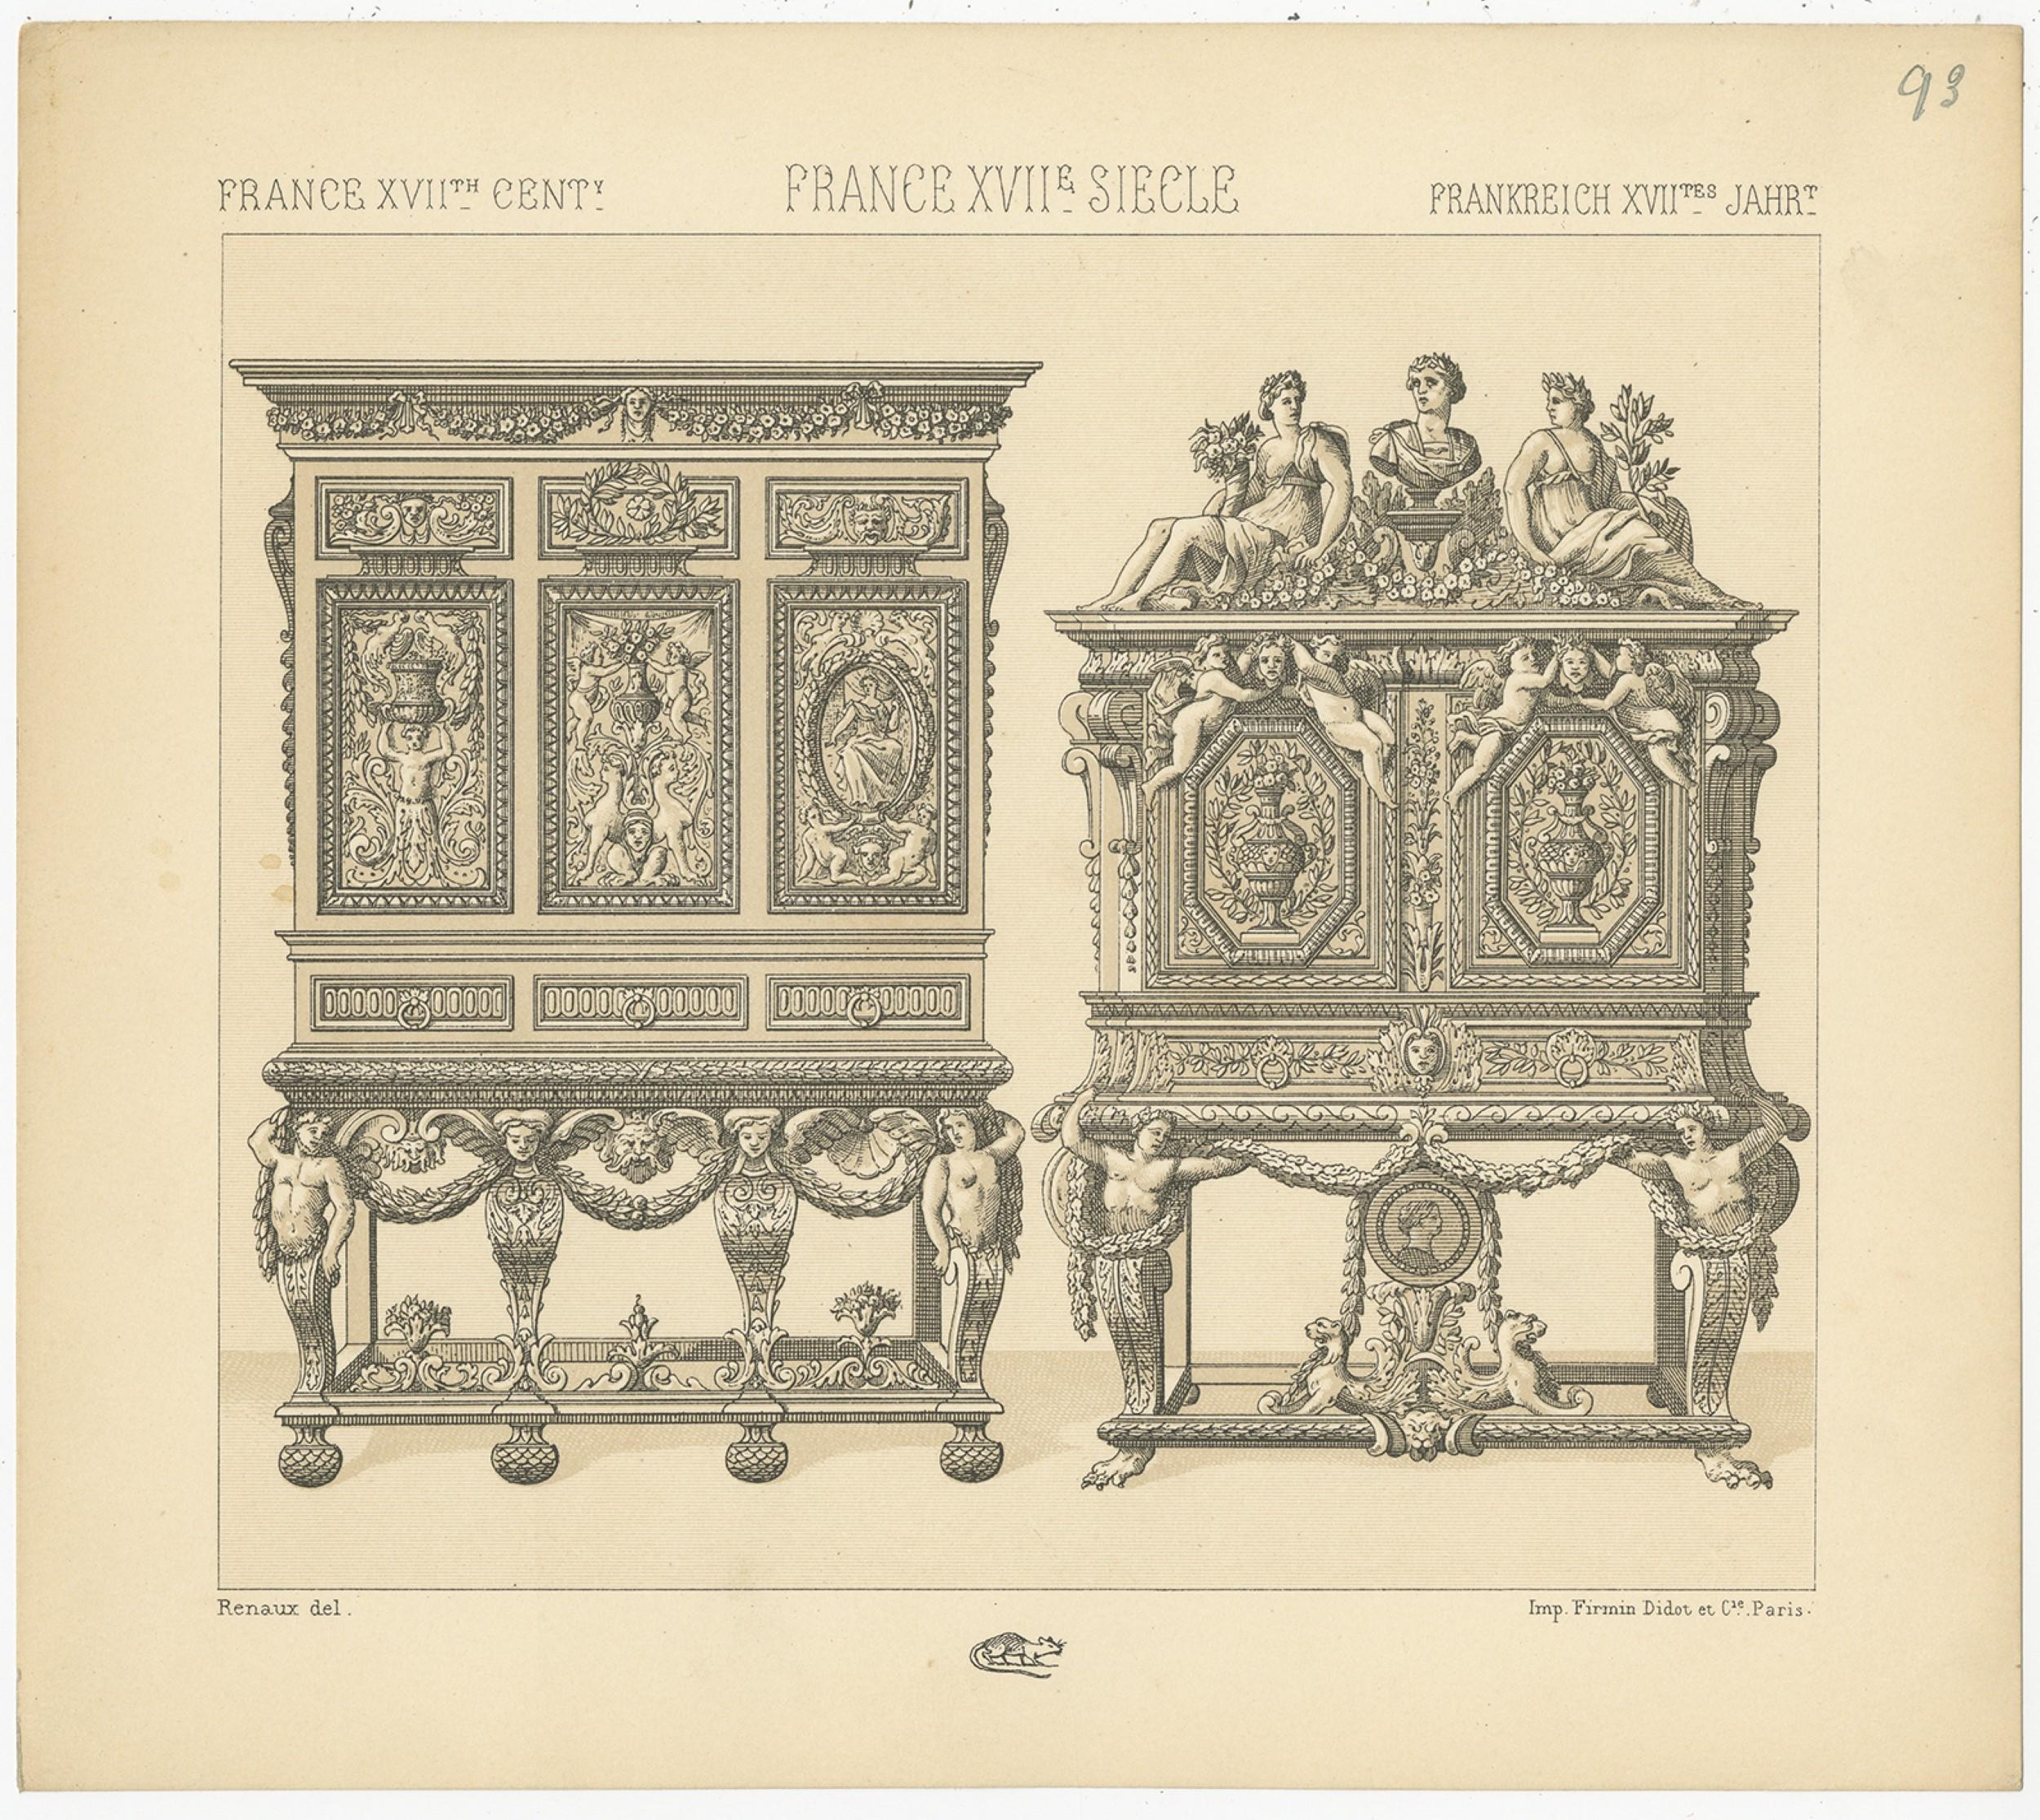 Antique print titled 'France XVIIth Cent - France XVIIe Siecle - Frankreich XVIItes Jahr'. Chromolithograph of French 17th century furniture. This print originates from 'Le Costume Historique' by M.A. Racinet. Published circa 1880.